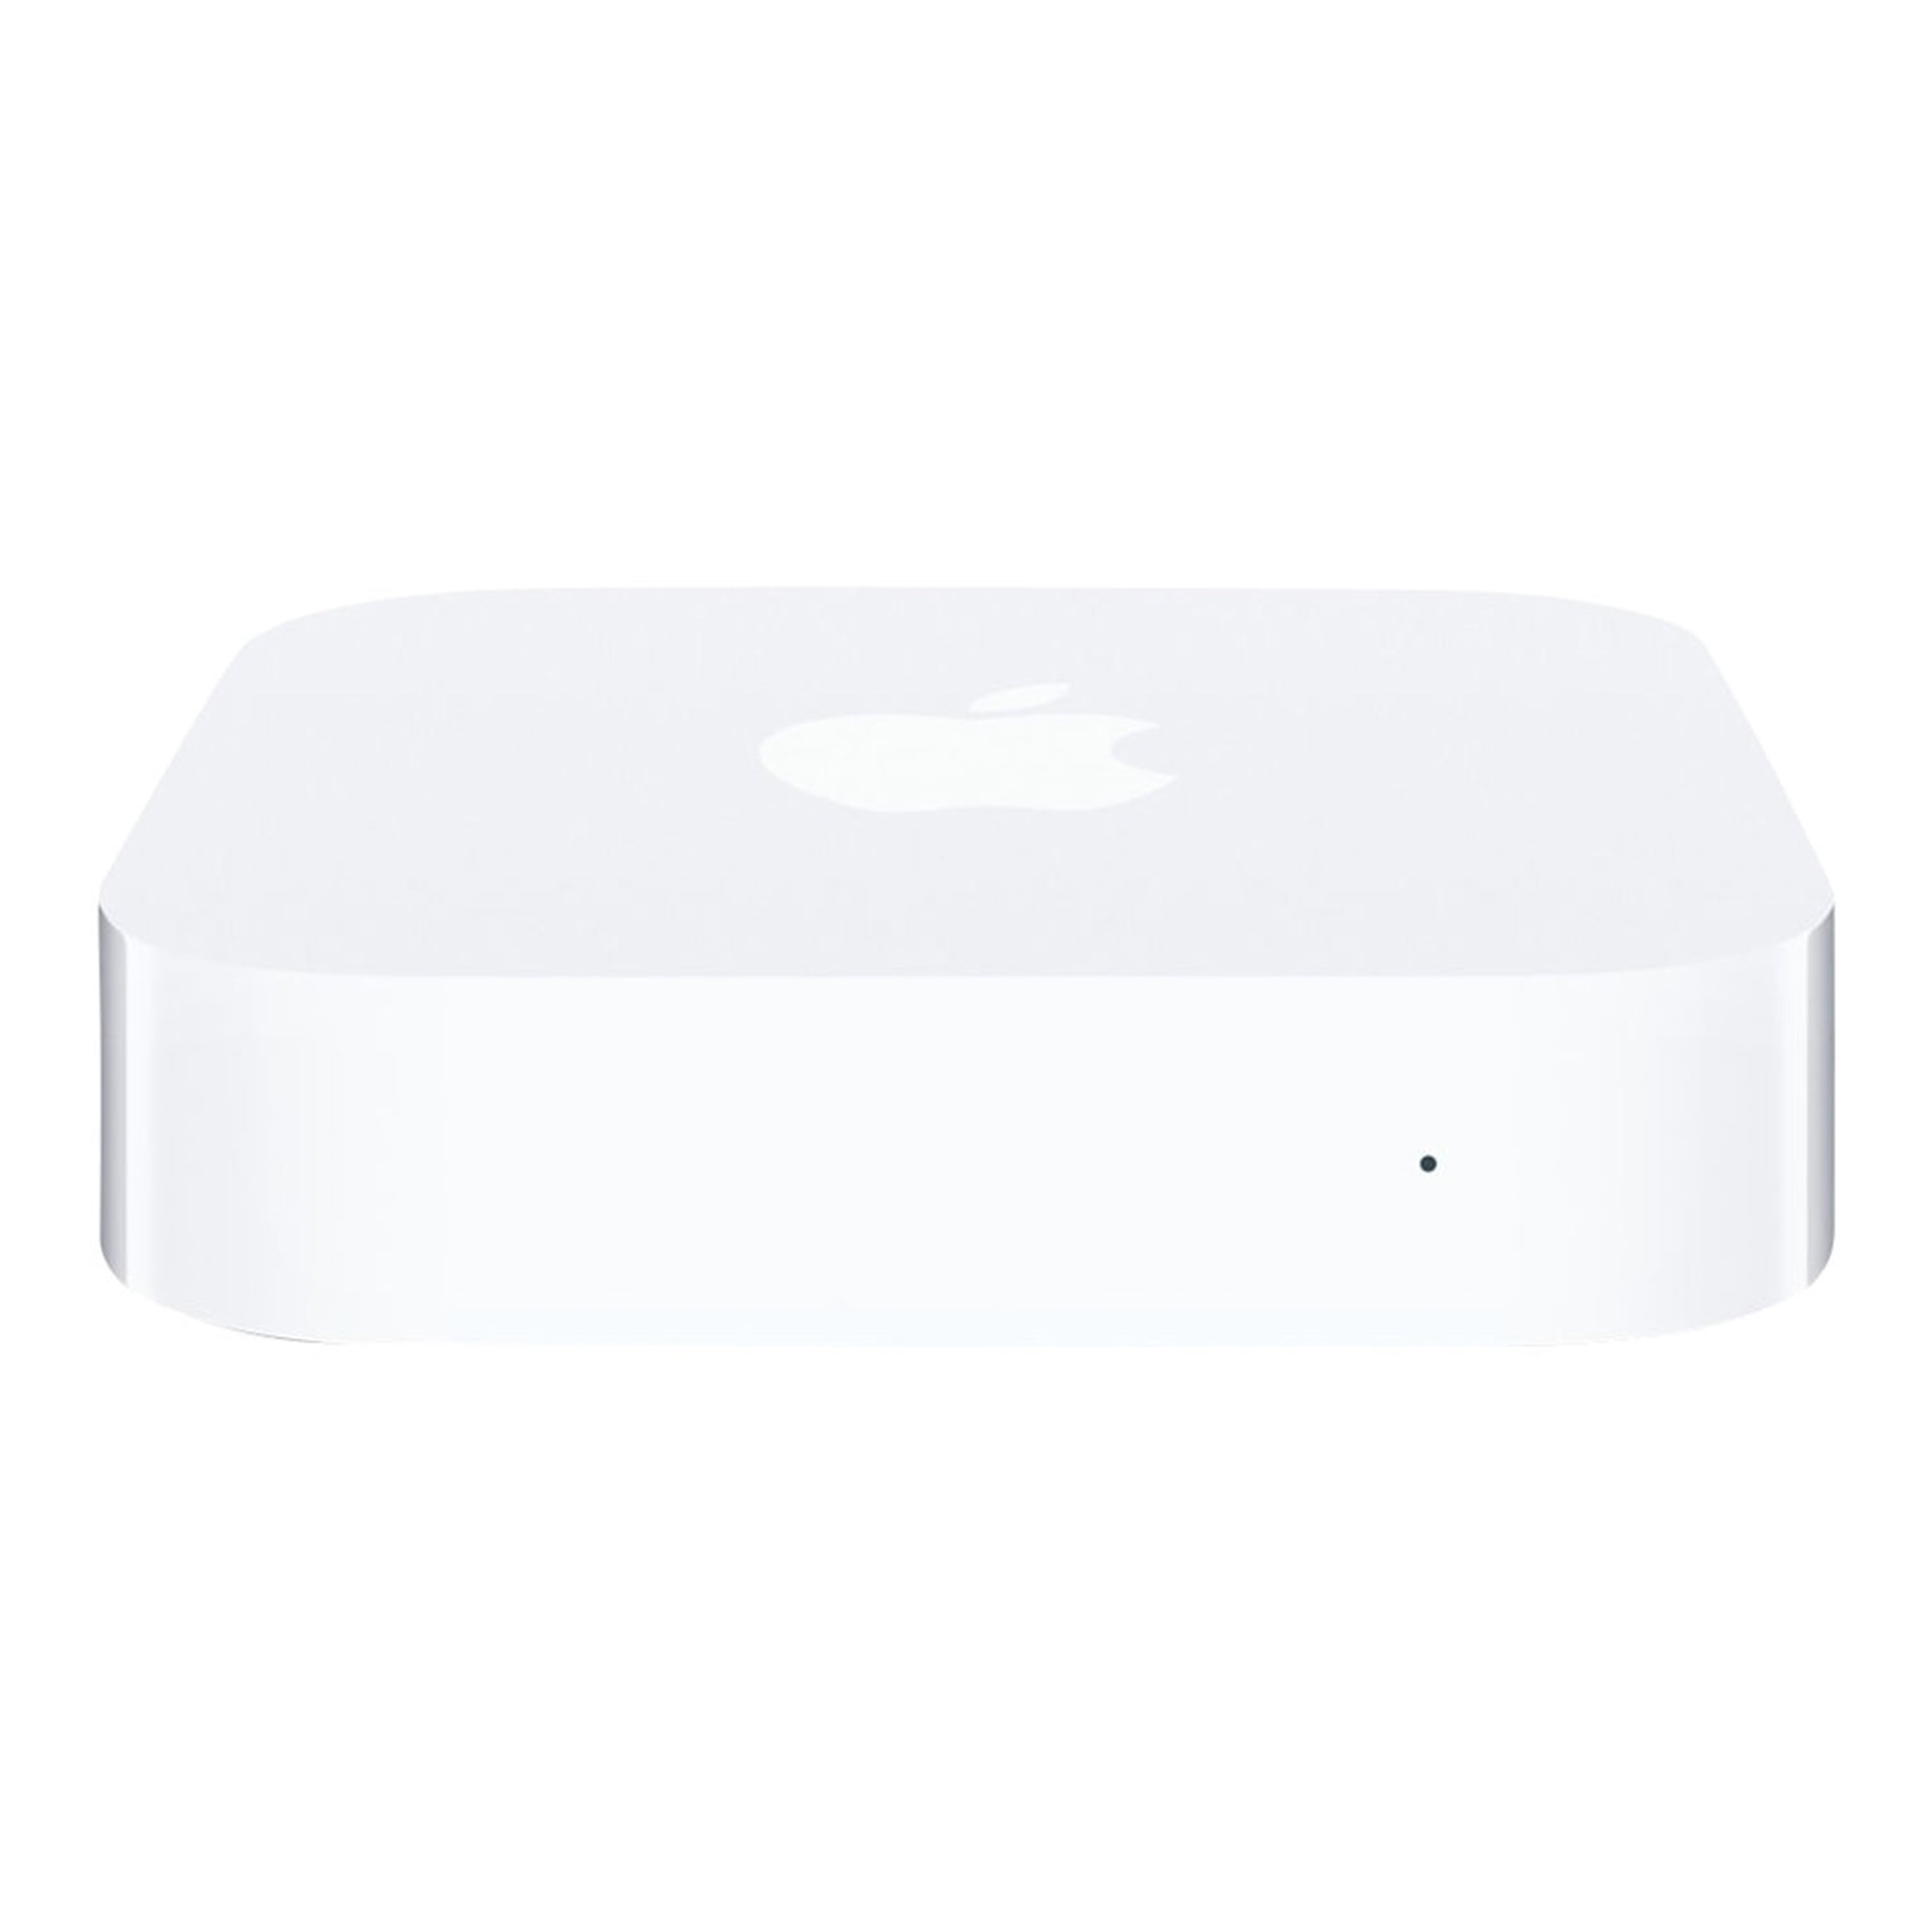 Apple Express 802.11n (2nd Generation) Base Router, White (Used - Good) - Walmart.com